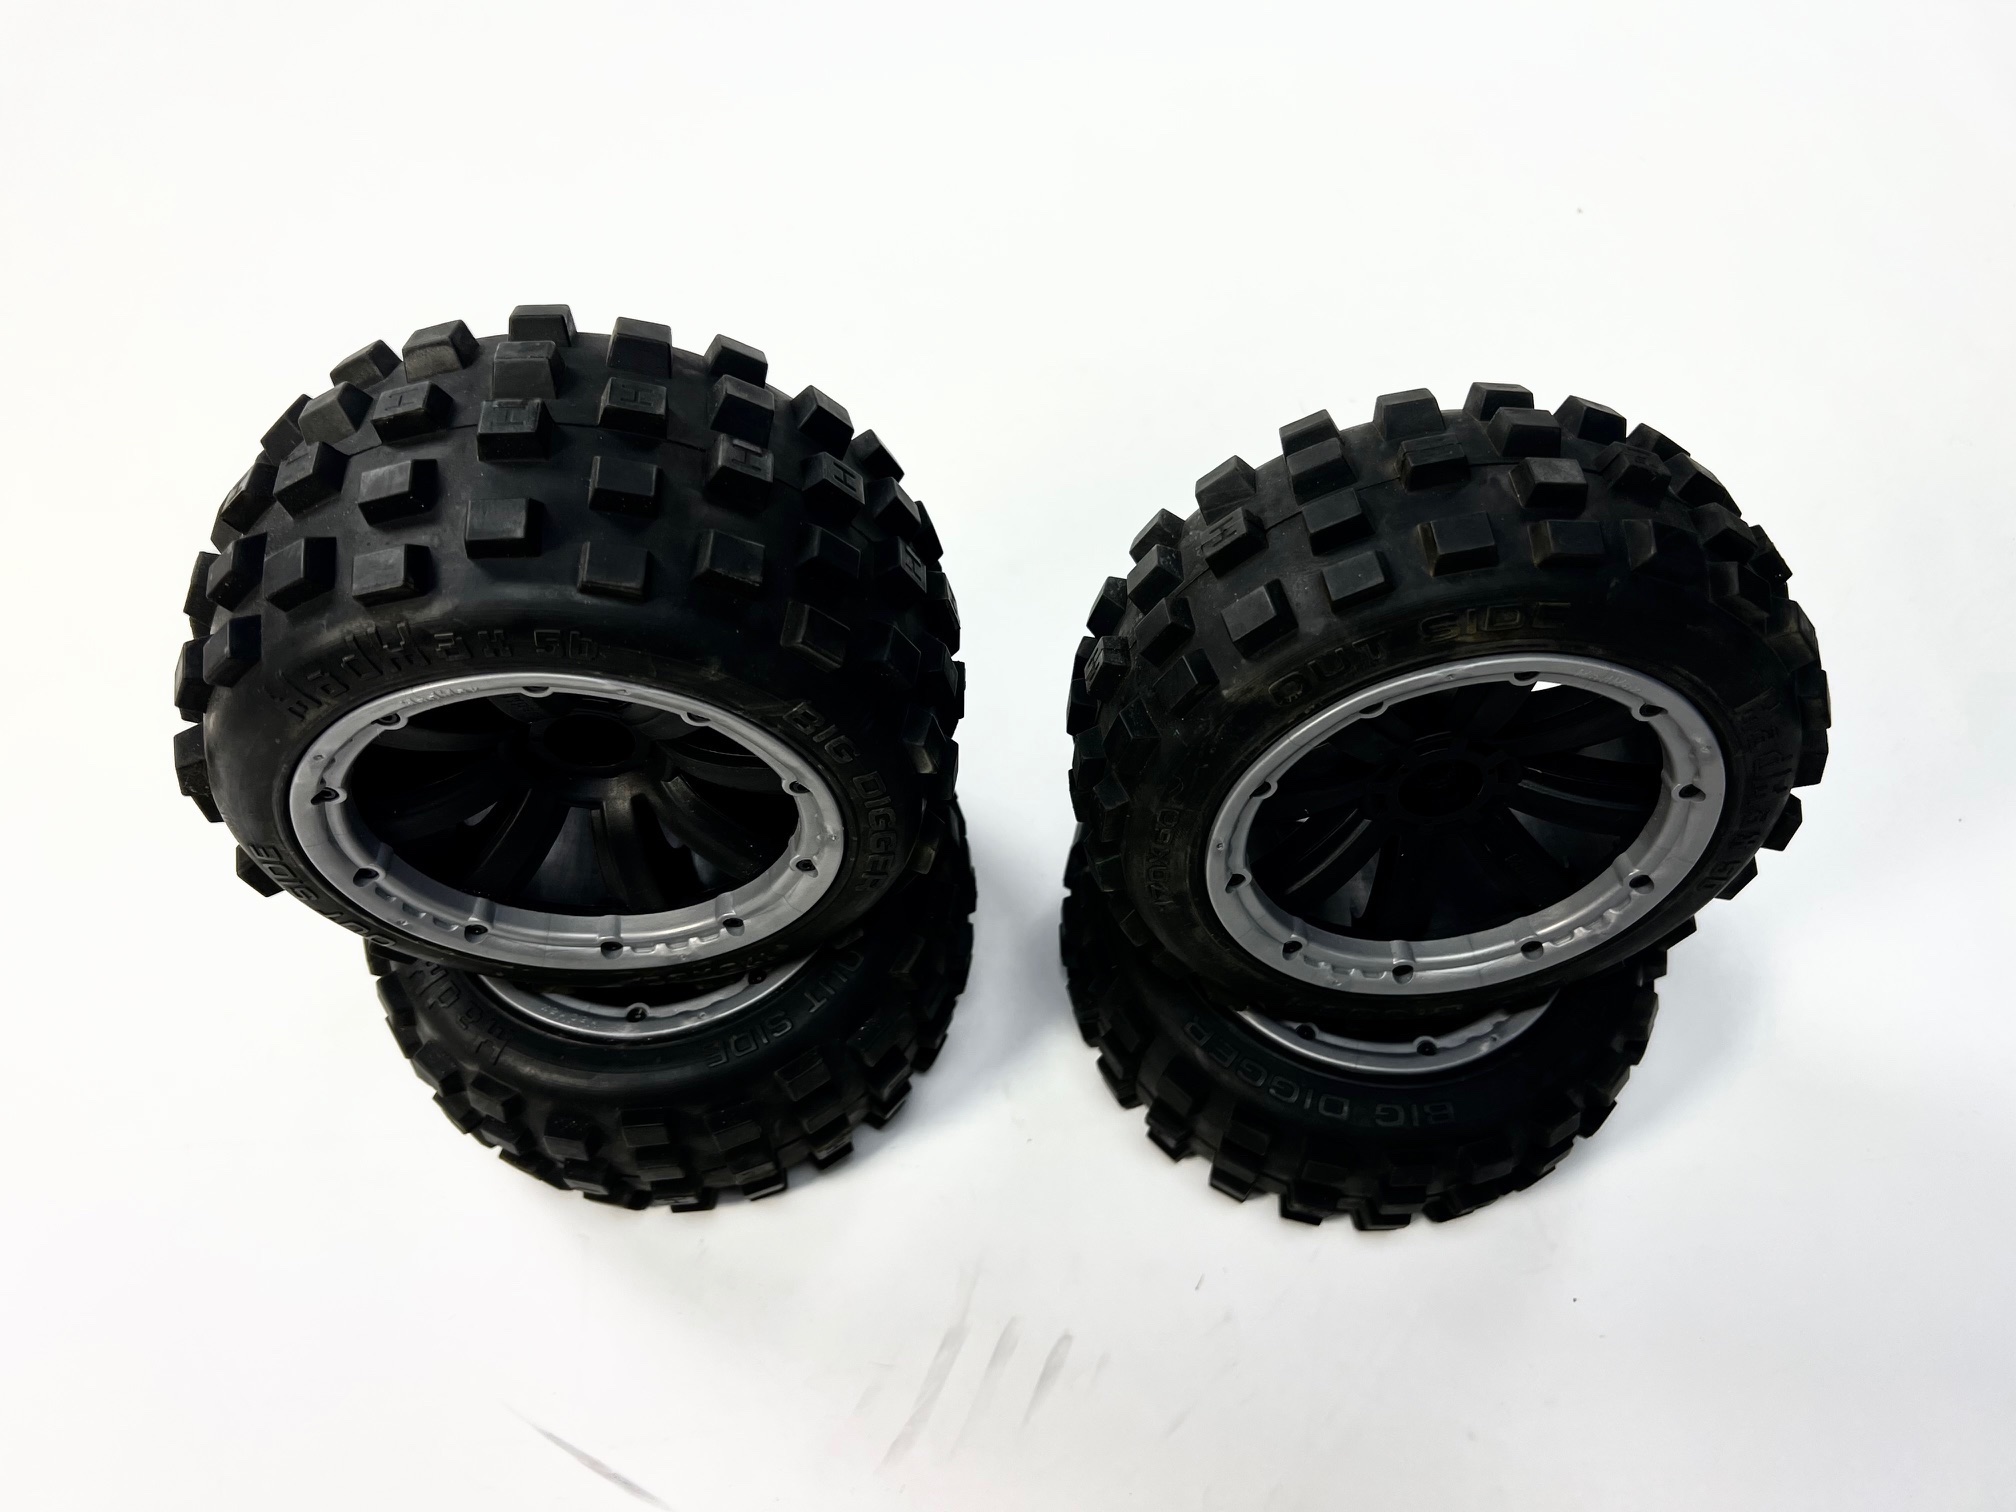 MadMax BIG DIGGER 170x80/x60 tires for FG/Smartech and other (18 mm square drive), used